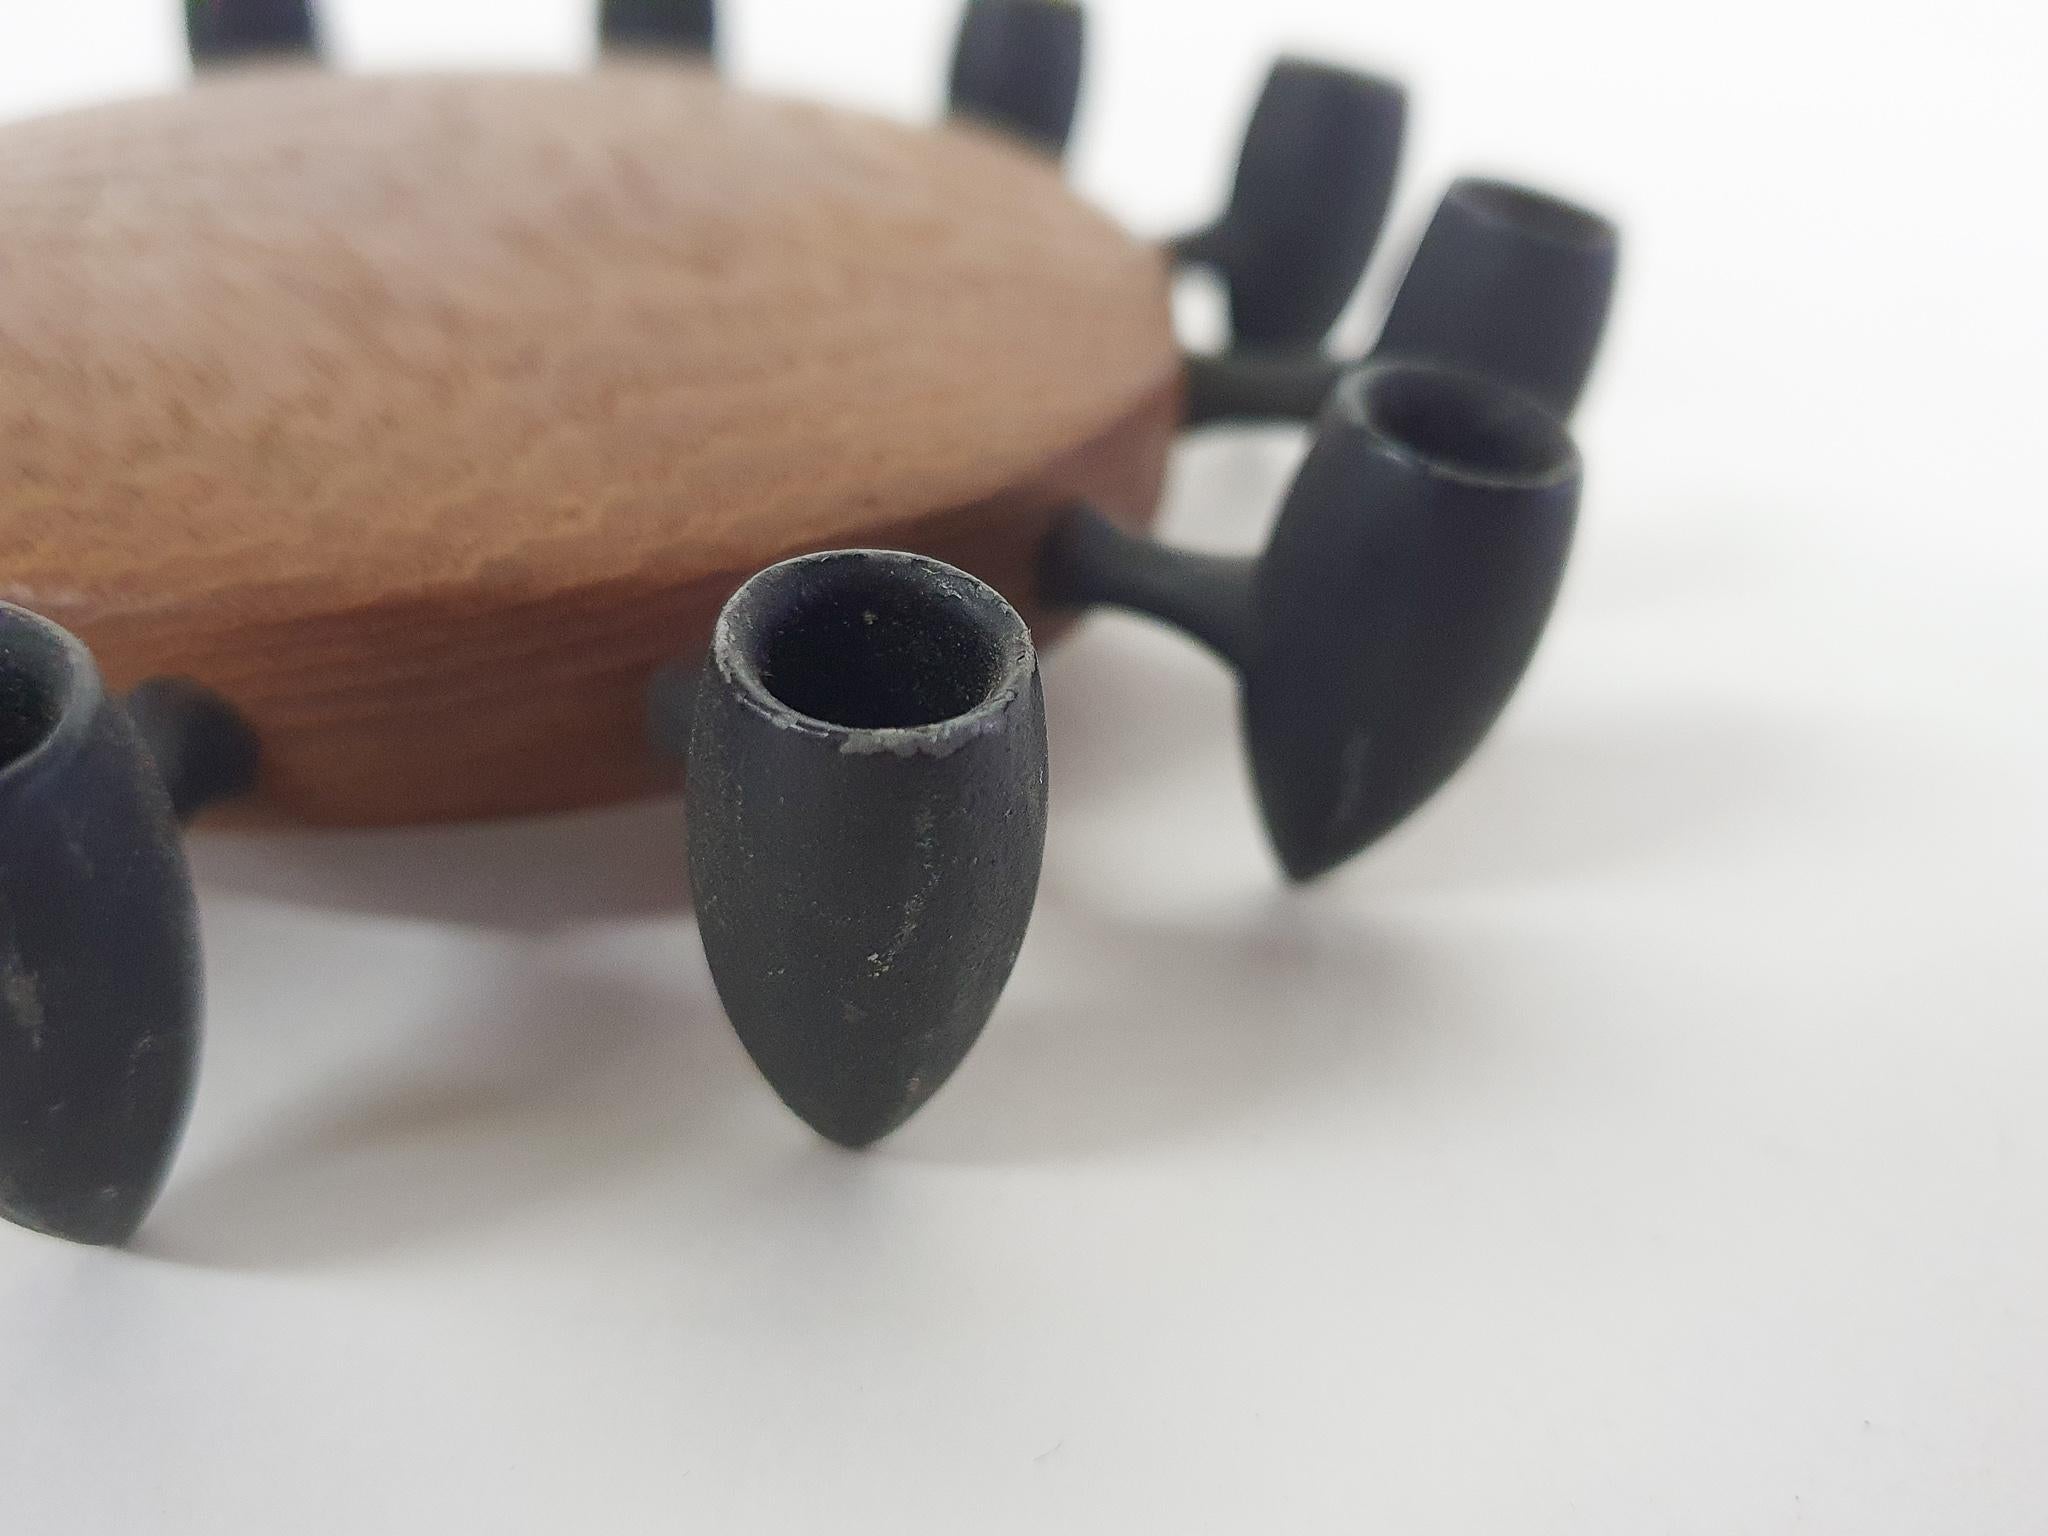 Mid-20th Century Round Teak and Metal Candleholder by Digsmed, Danish Design, 1964 For Sale